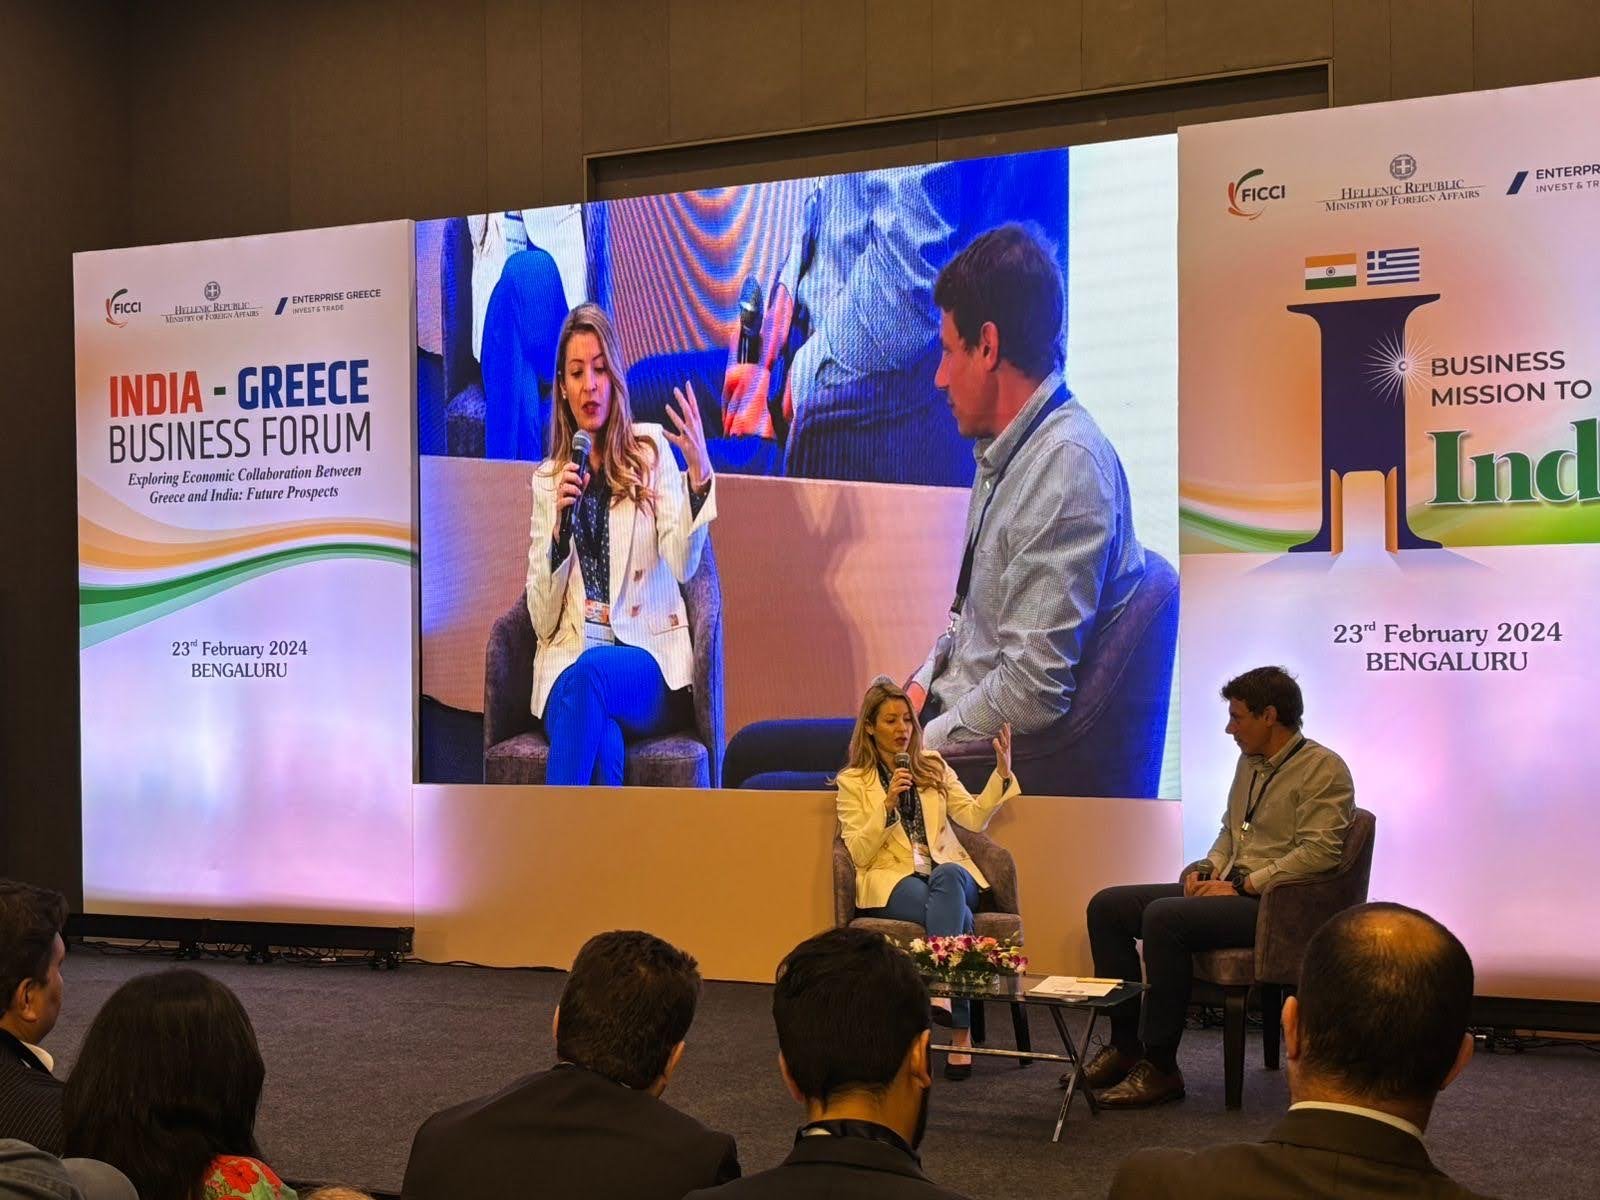 Dr. Maria Dunford, CEO of Lifebit, accompanies the Greek Prime Minister on a state visit to India, aims to enhance strategic partnerships.